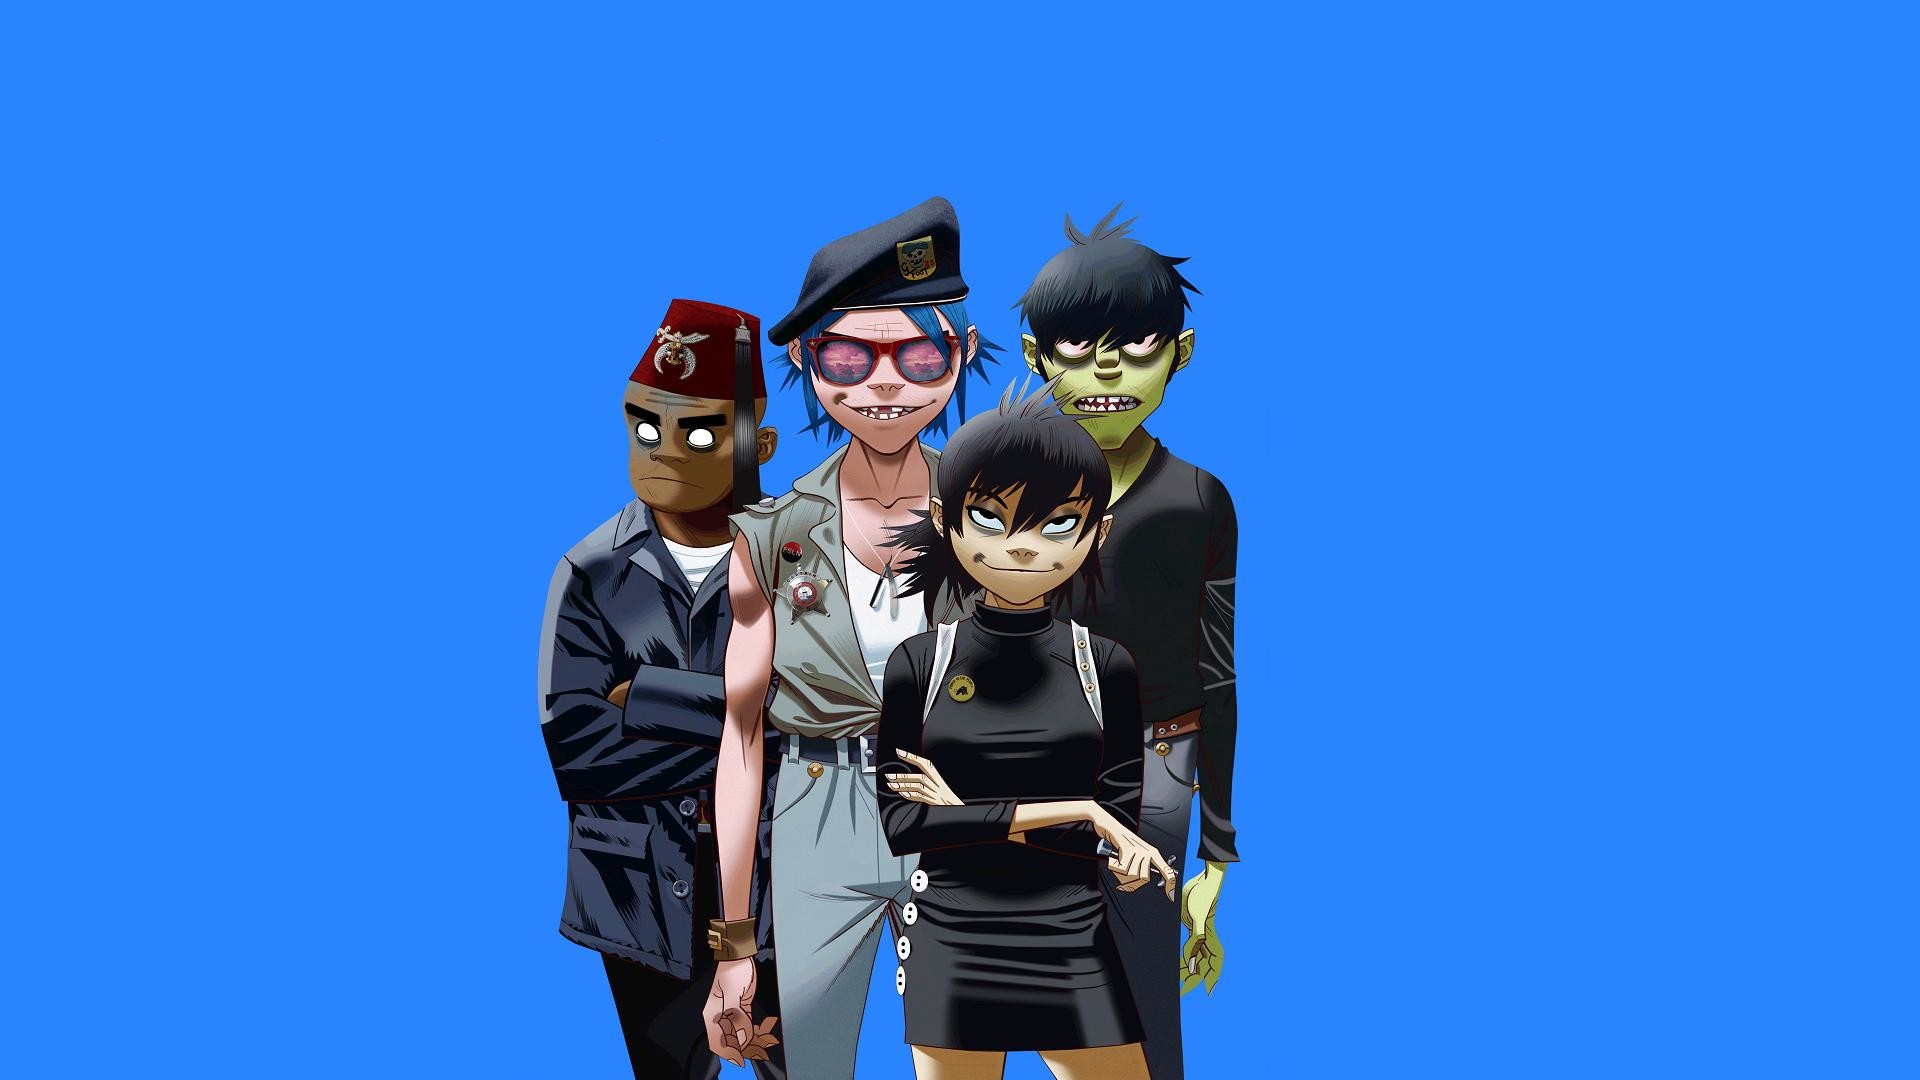 Gorillaz wallpapers for desktop download free Gorillaz pictures and  backgrounds for PC  moborg